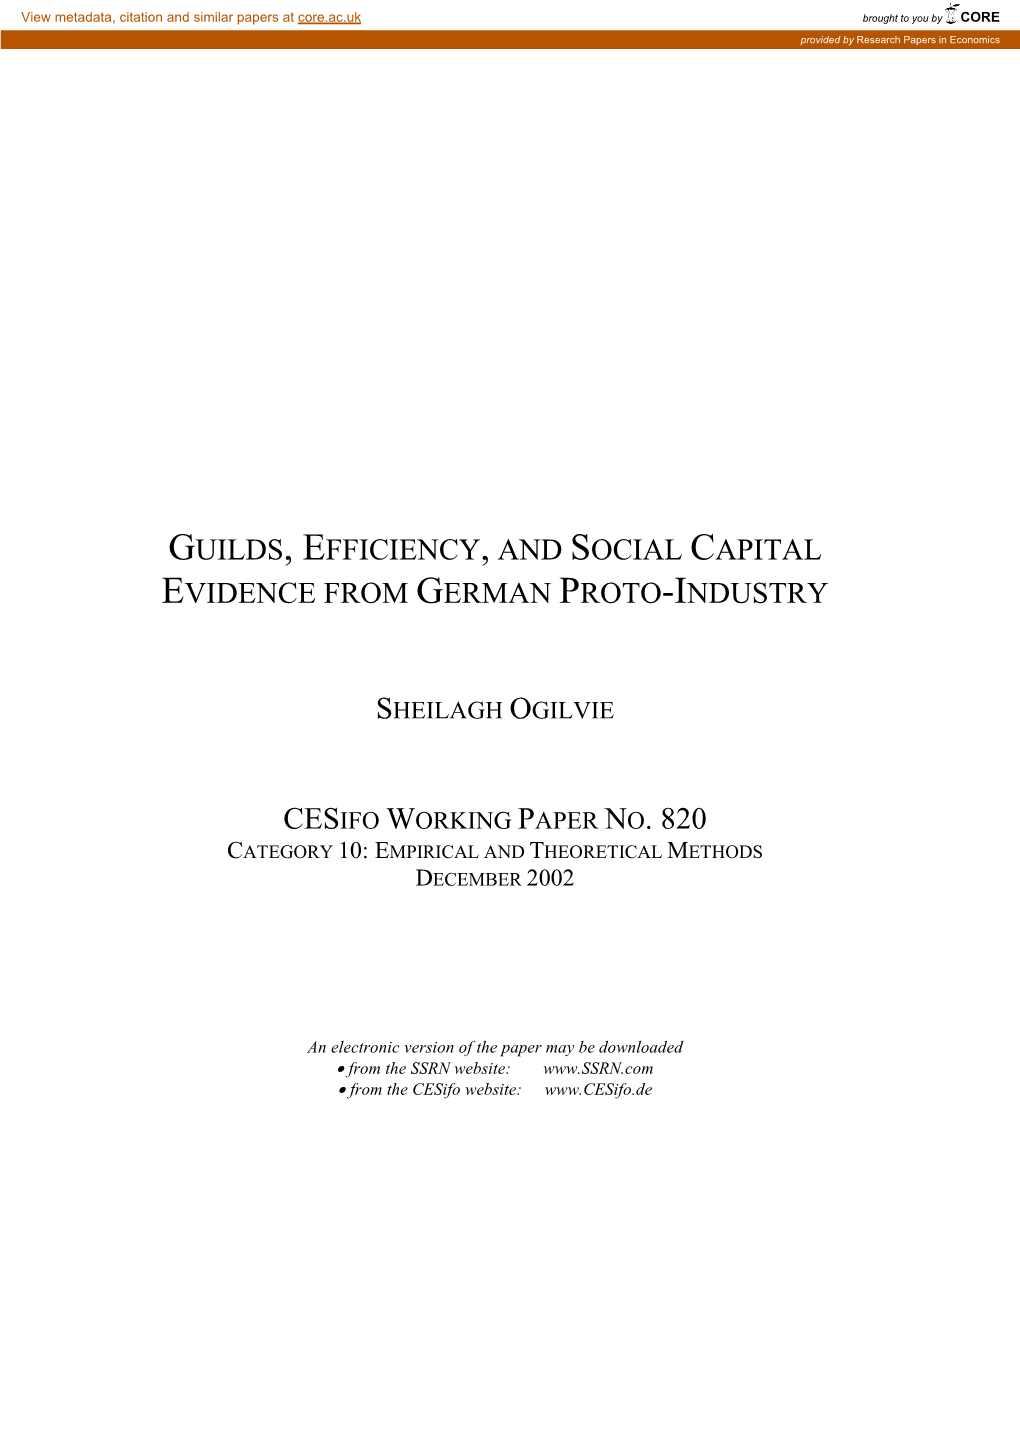 Guilds, Efficiency, and Social Capital: Evidence from German Proto-Industry